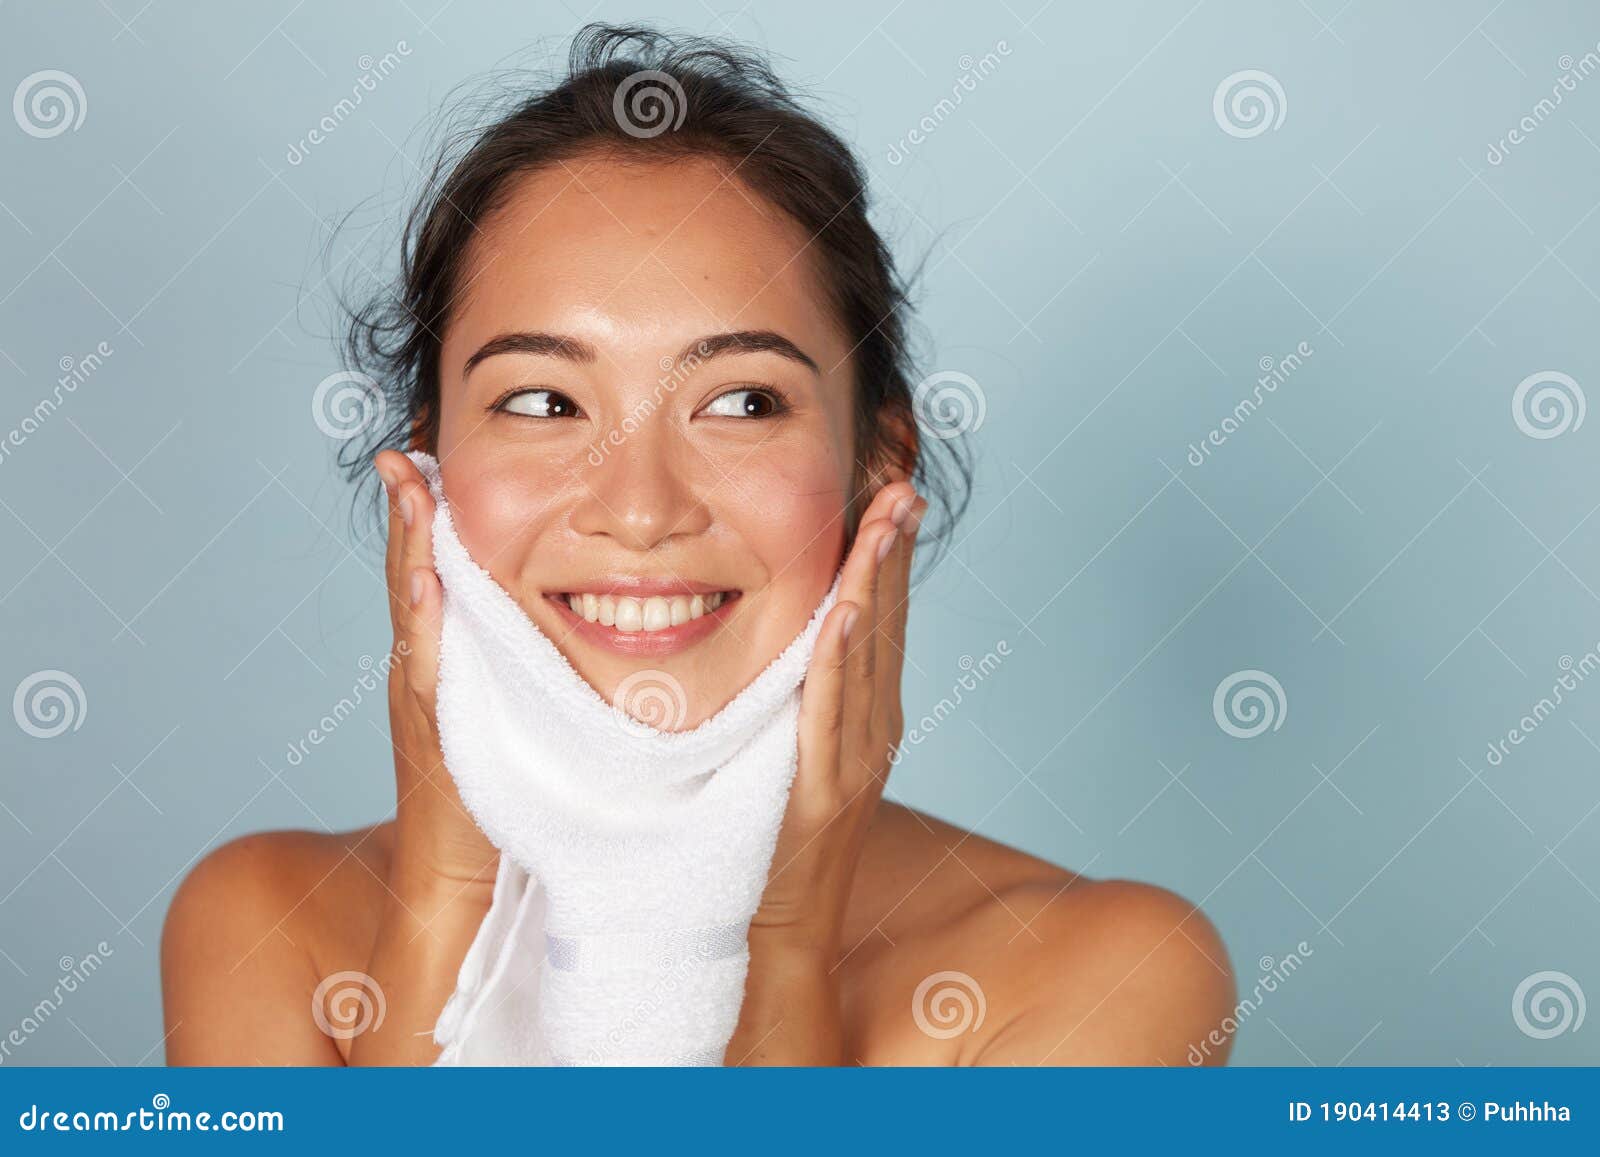 woman cleaning facial skin with towel after washing face portrait